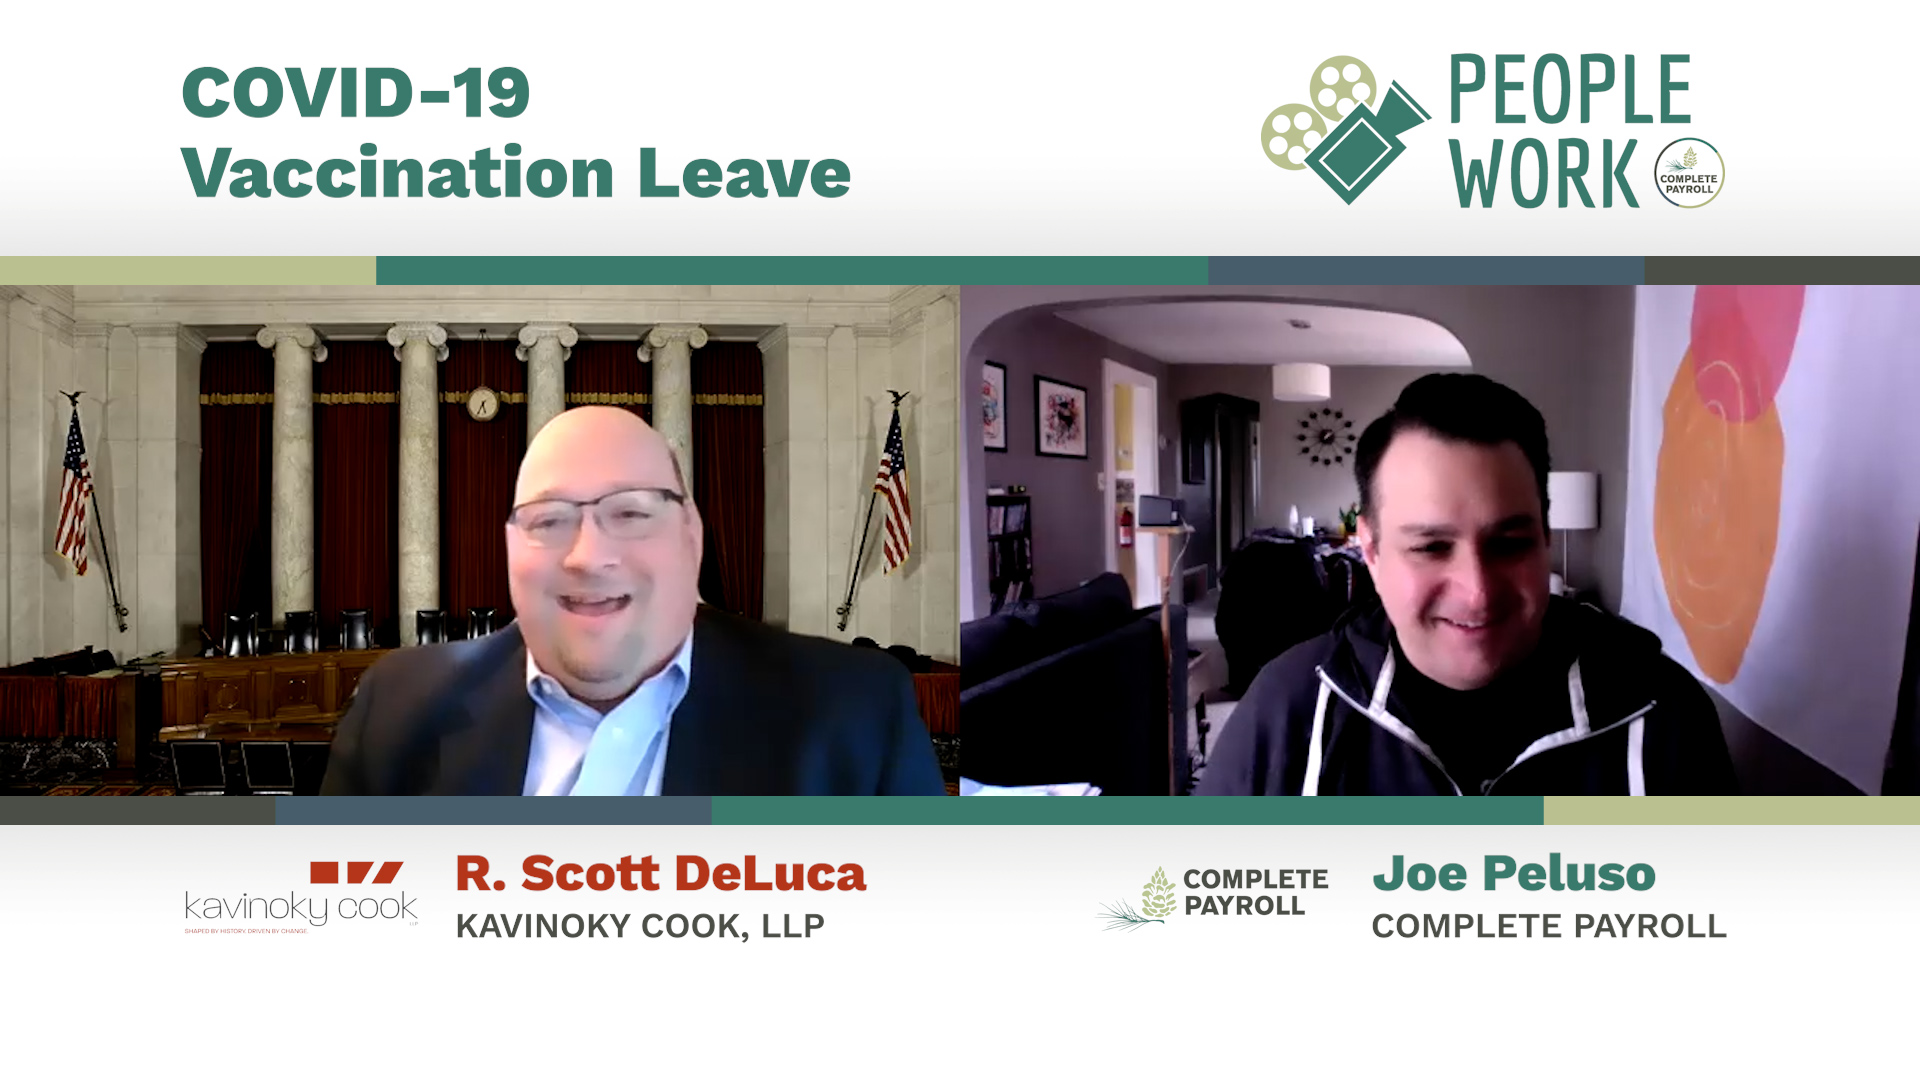 Scott DeLuca from Kavinoky Cook LLP discusses the various COVID-19-related leaves that employers and employees need to be aware of. 